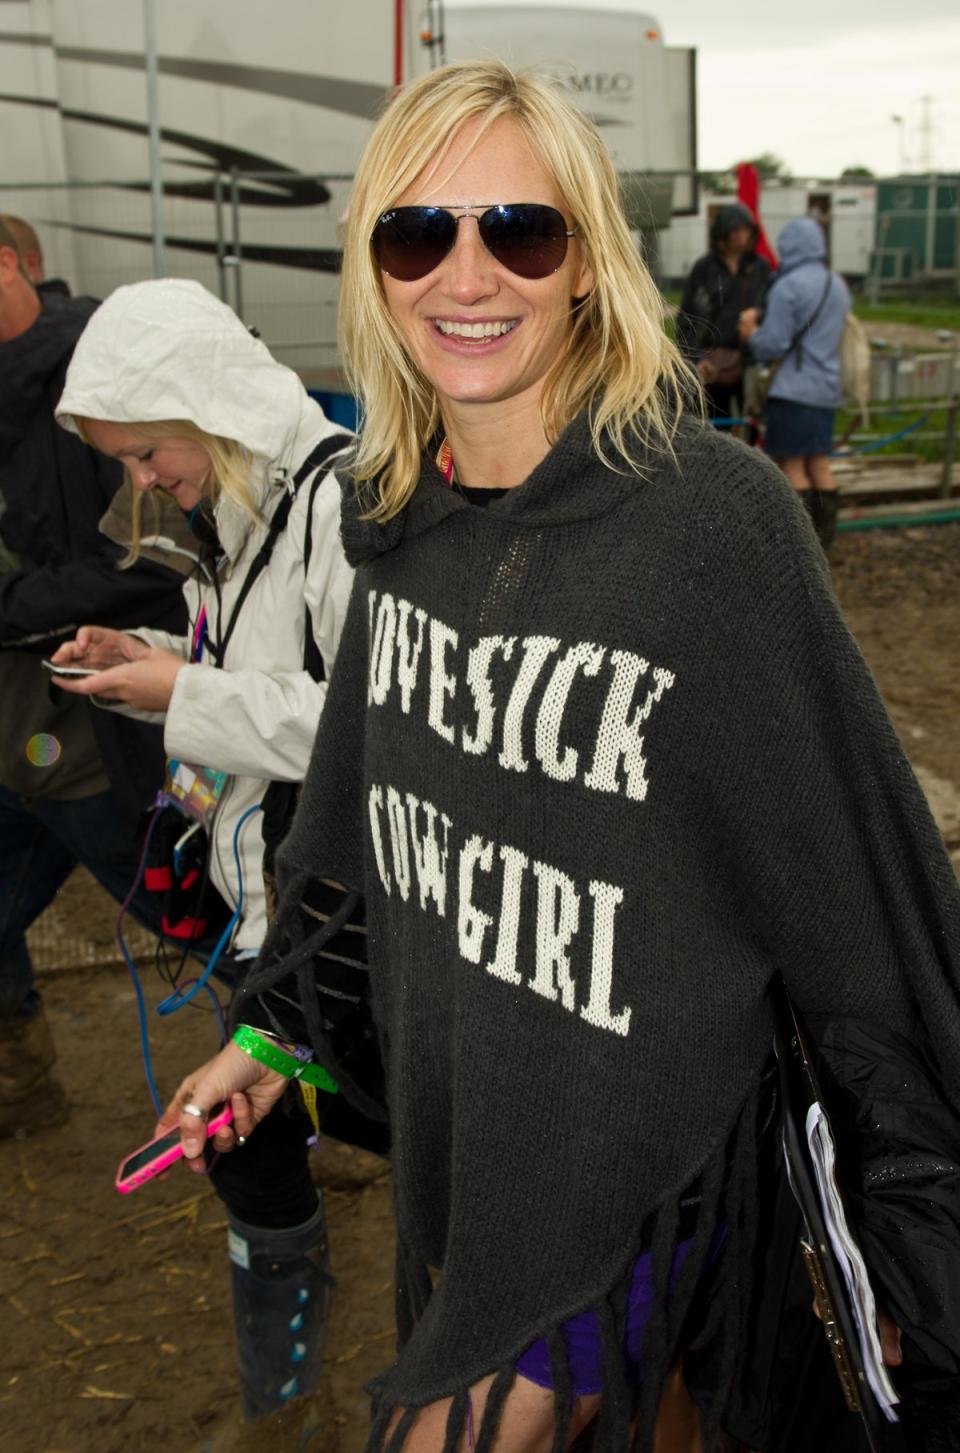 Whiley is the BBC’s main presenter at the festival on Worthy Farm in Somerset (Getty Images)